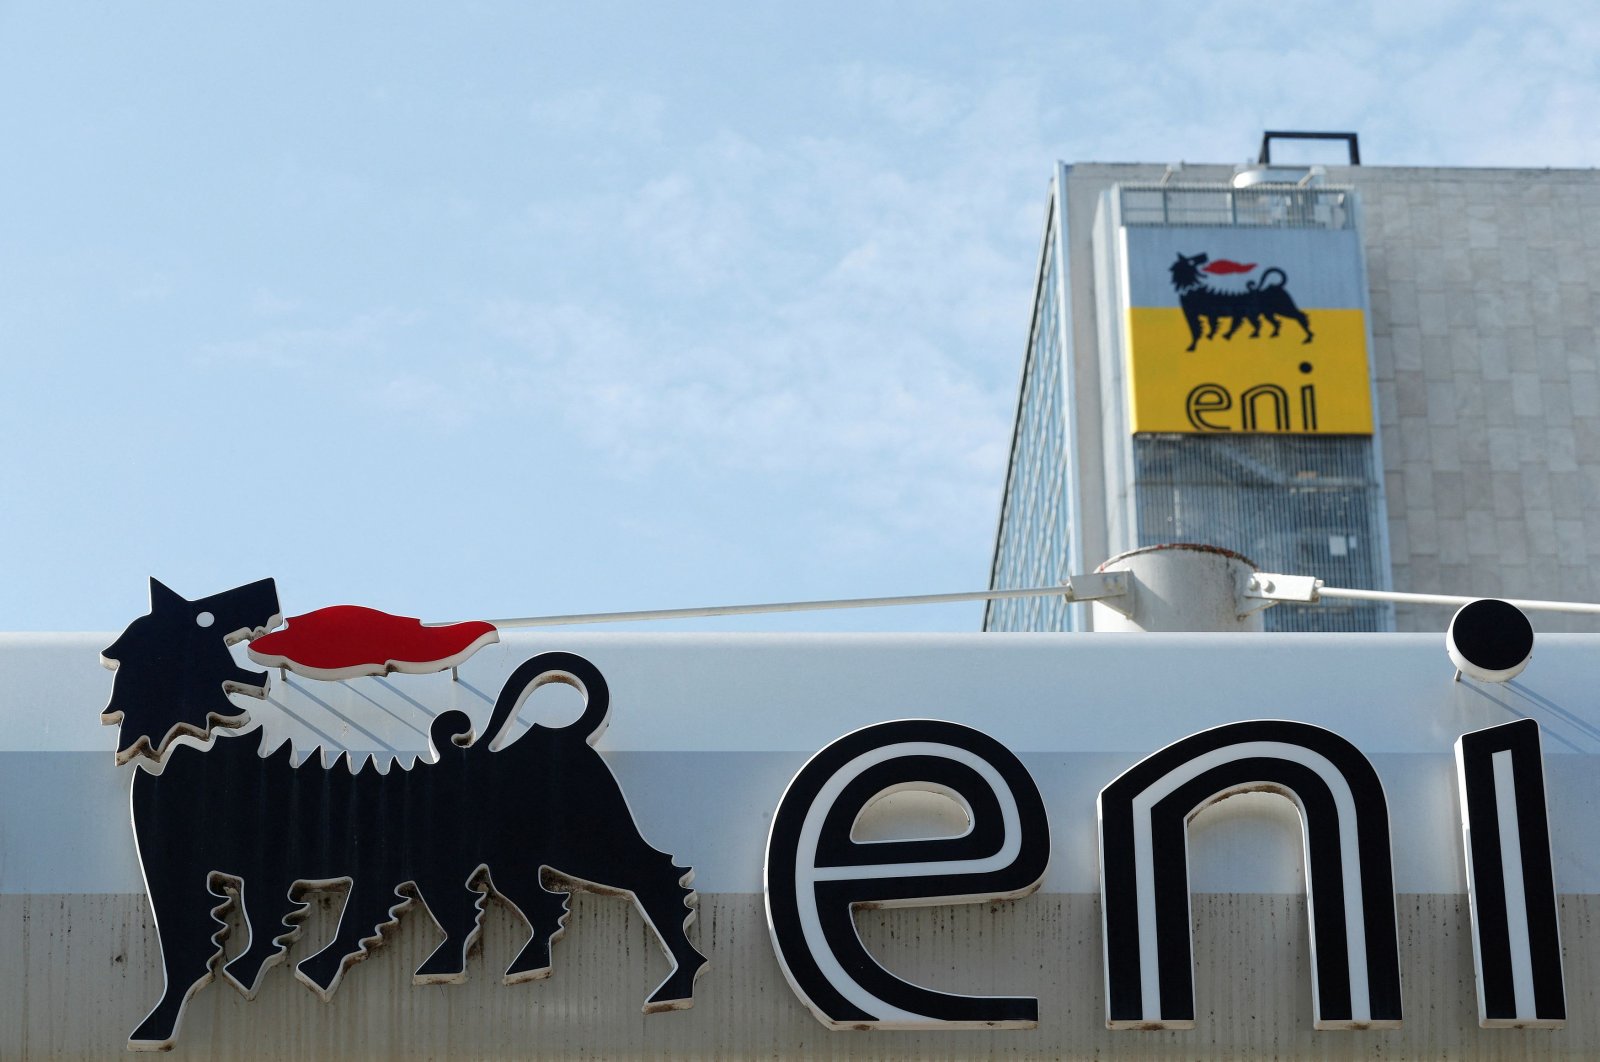 The logo of Italian energy company Eni is seen at a gas station in Rome, Italy, Sept. 30, 2018. (Reuters Photo)